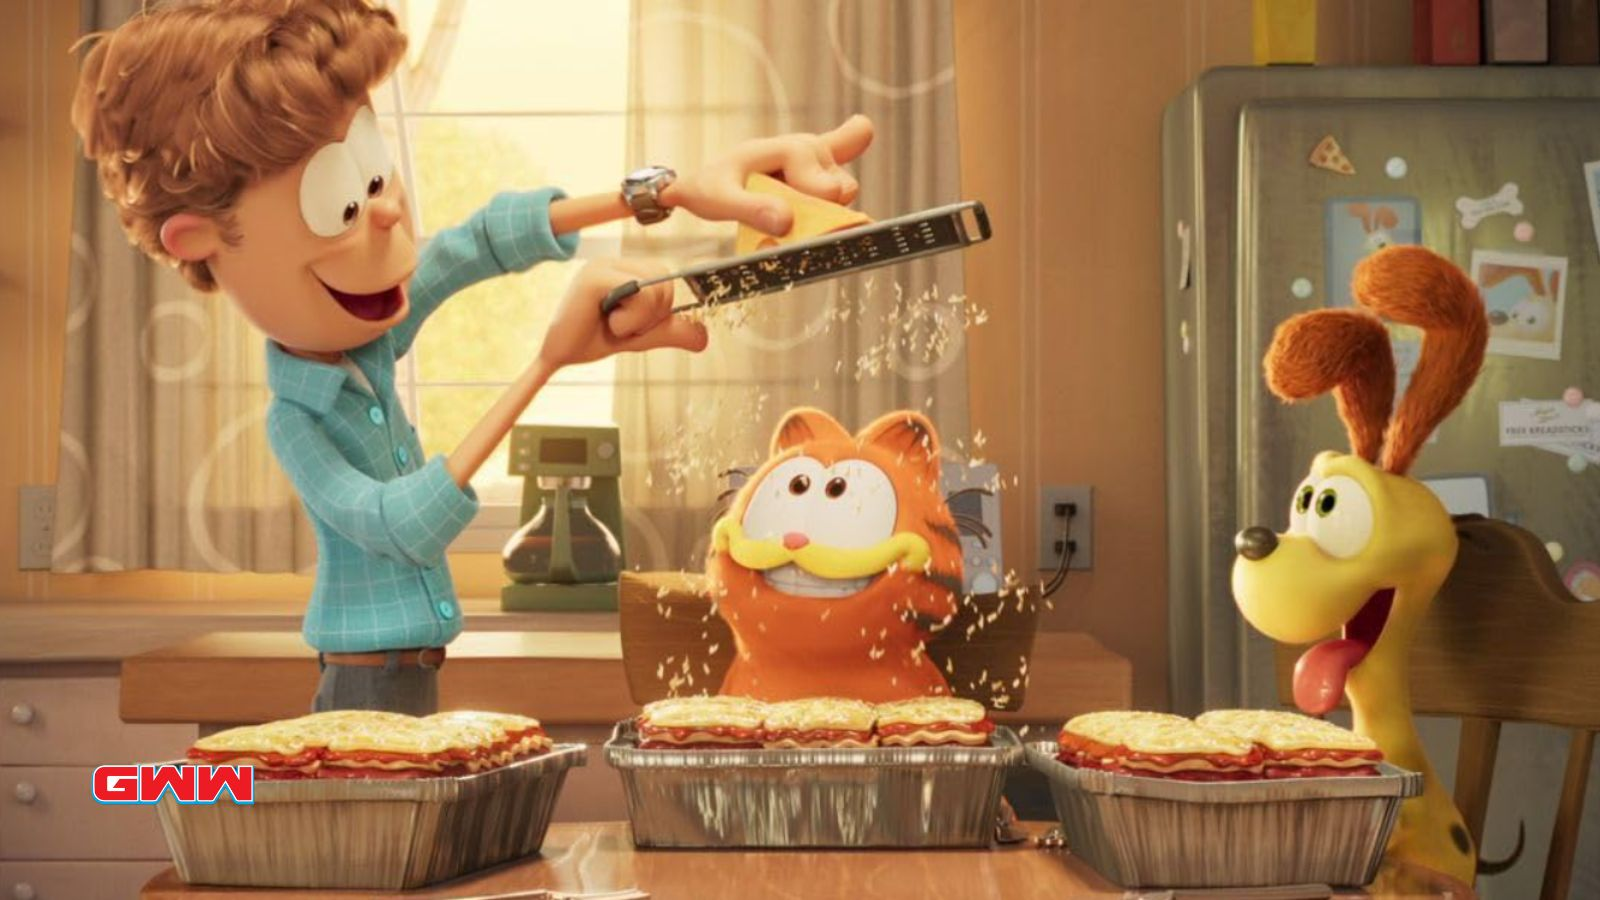 Garfield and Odie about to eat lasagna, The Garfield Movie trailer